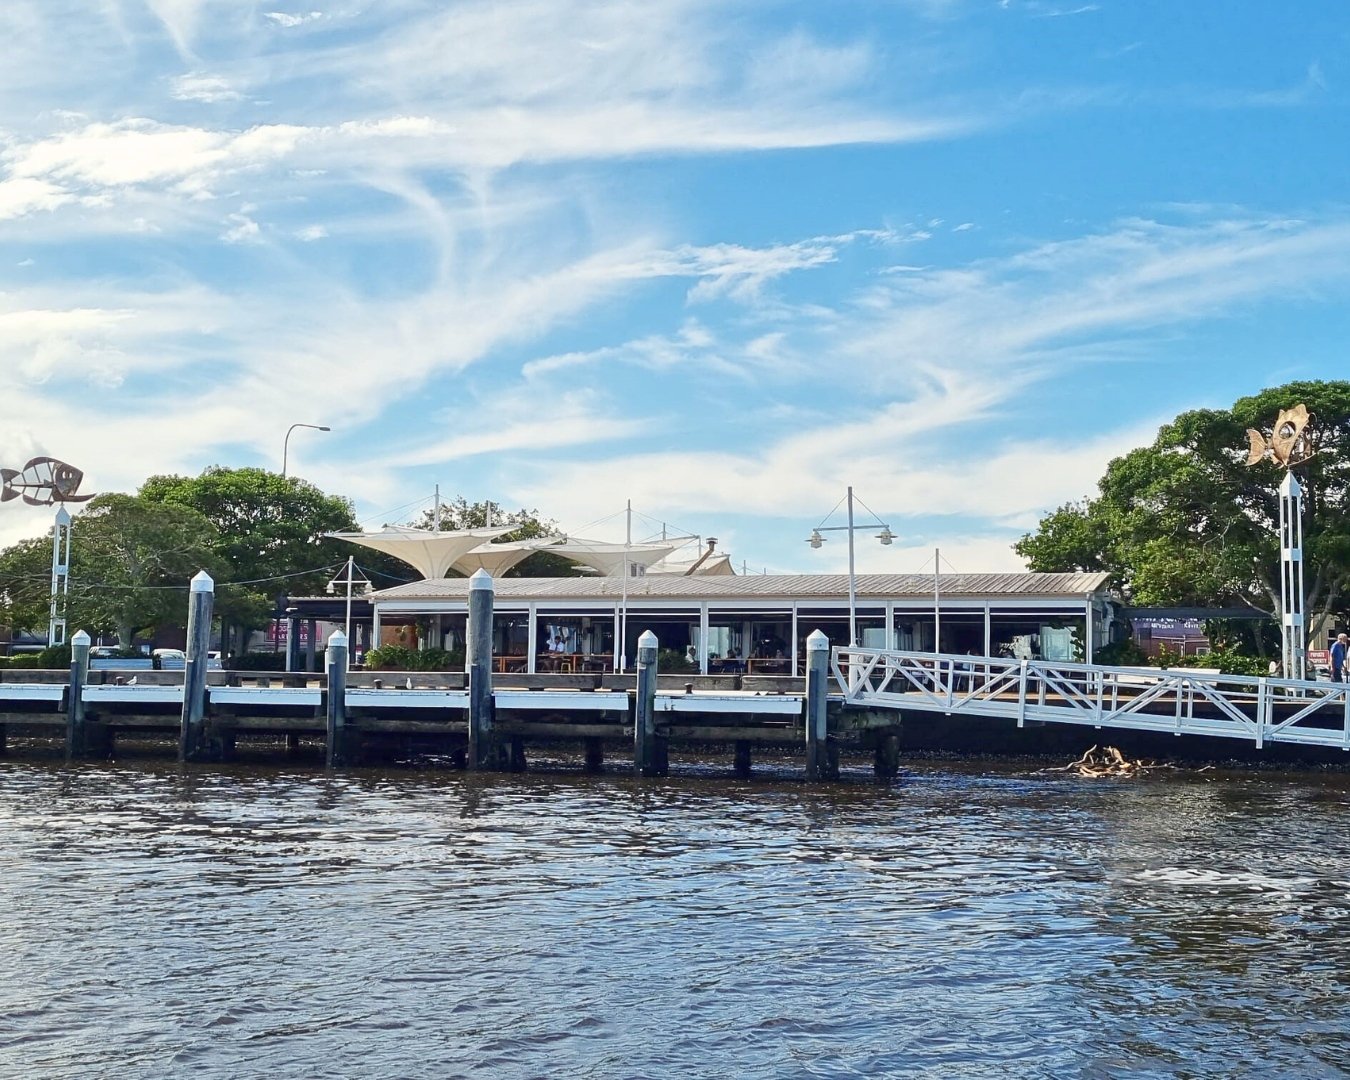 Ballinas BEST LOCATION! See you for breakfast, lunch, Happy Hour or Dinner! Live Music from 3pm today - see you on the deck!

#wharfbarballina #ballinansw #whatsonballina